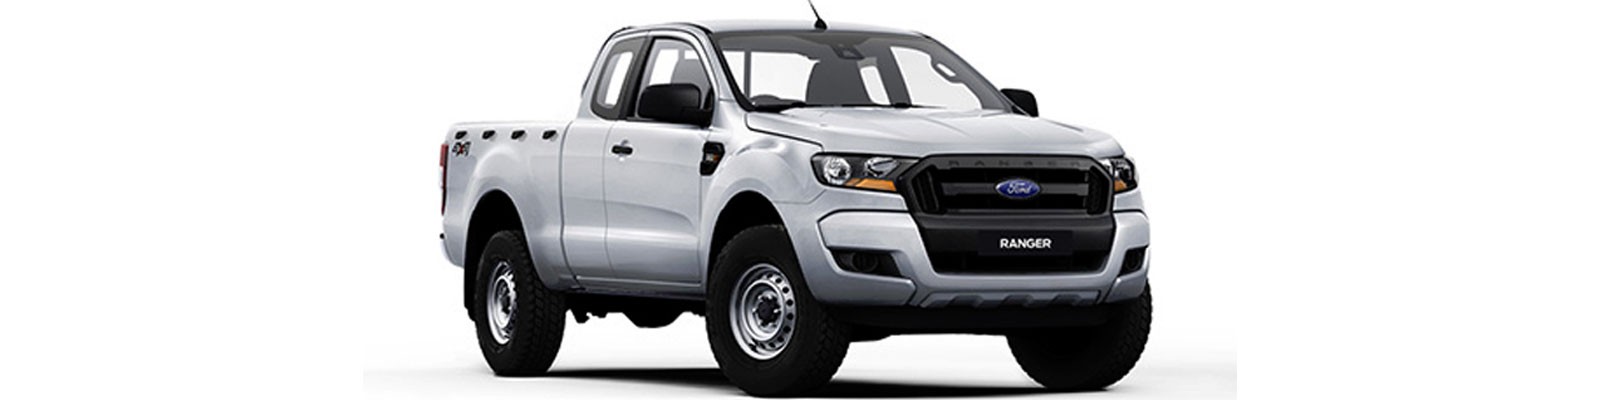 Accessories For The Ford Ranger Super Cab 2016 to 2019